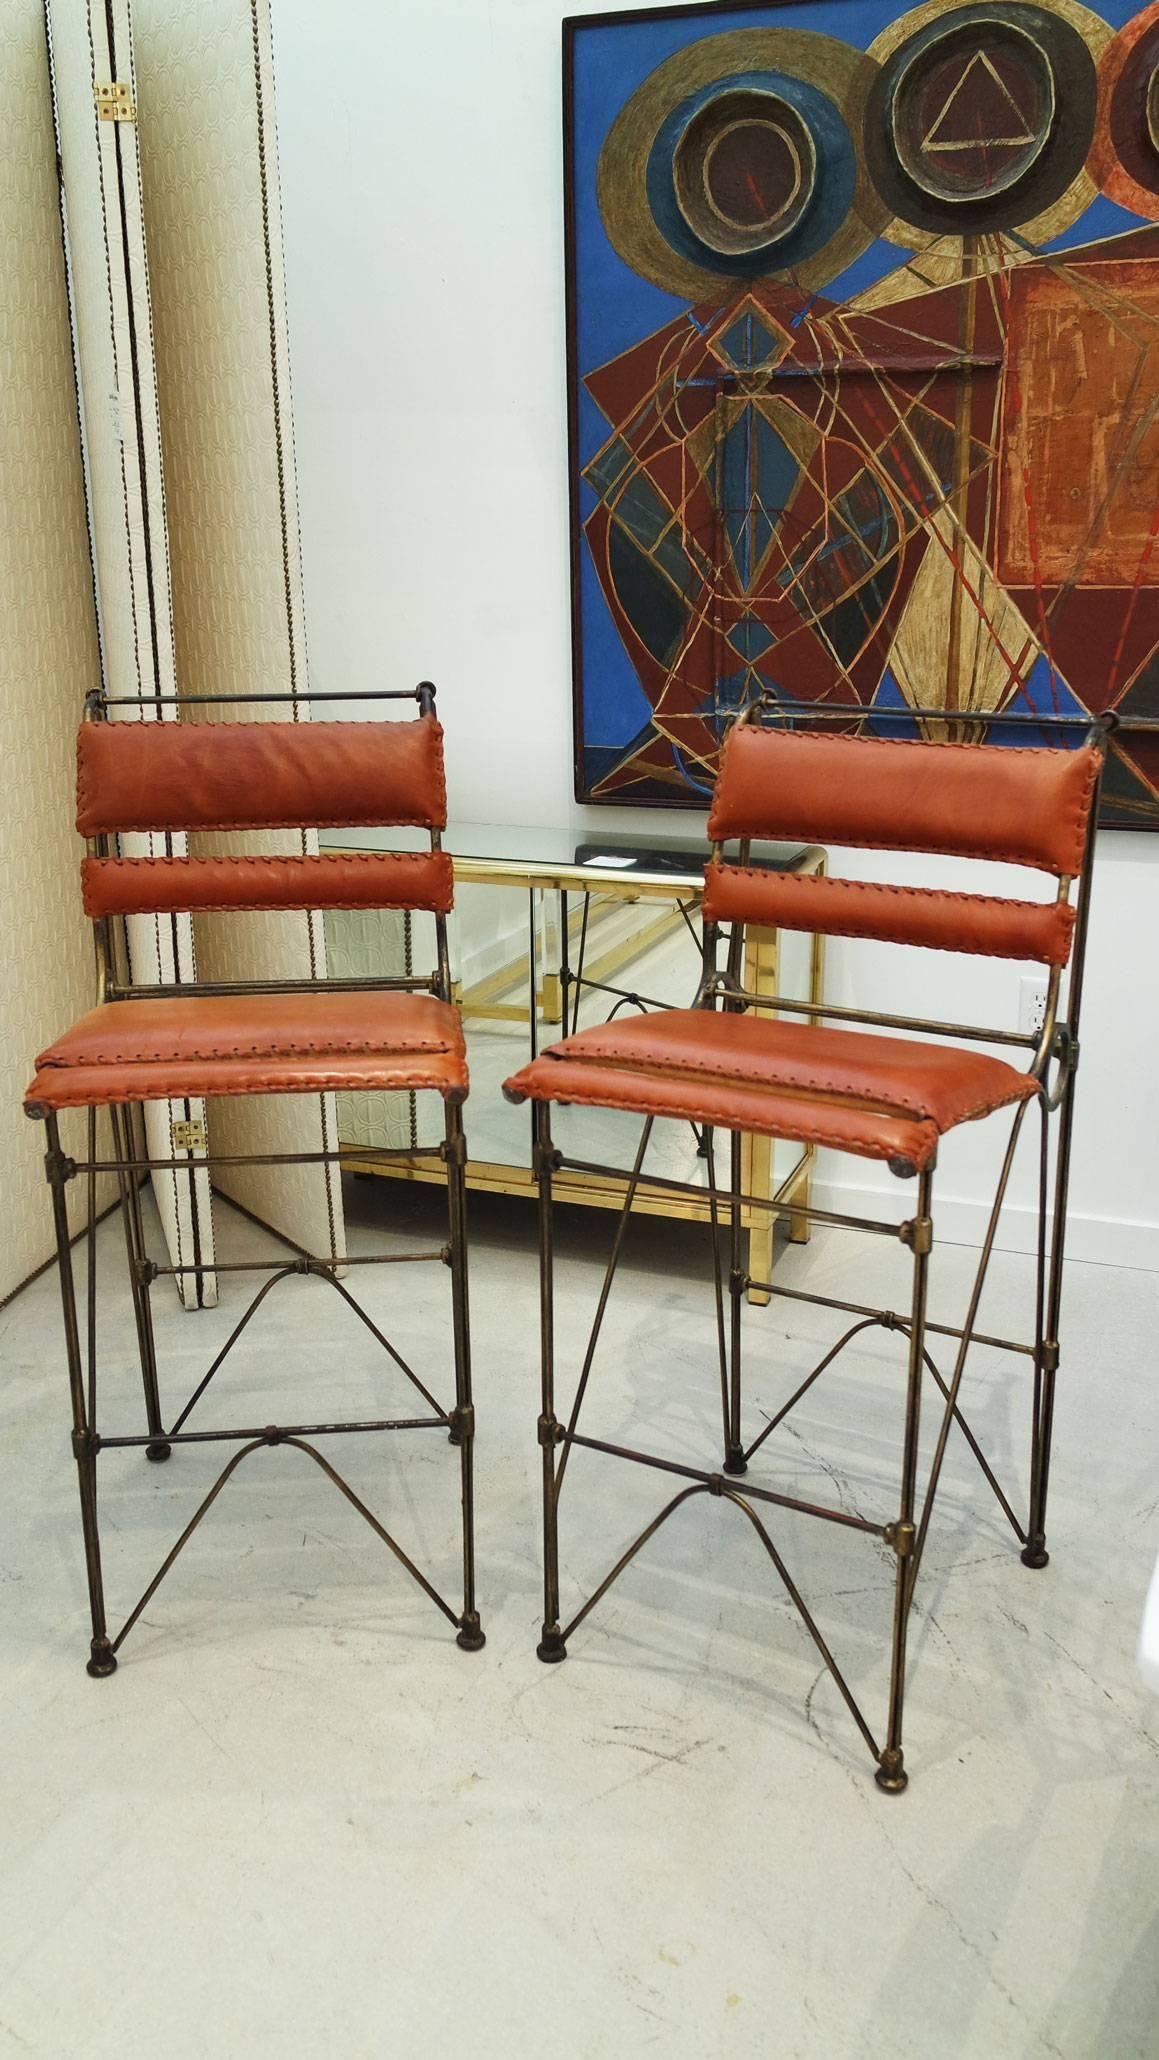 Pair of industrial leather and iron barstools by Ilan Goor. Measures: Seat height 28.